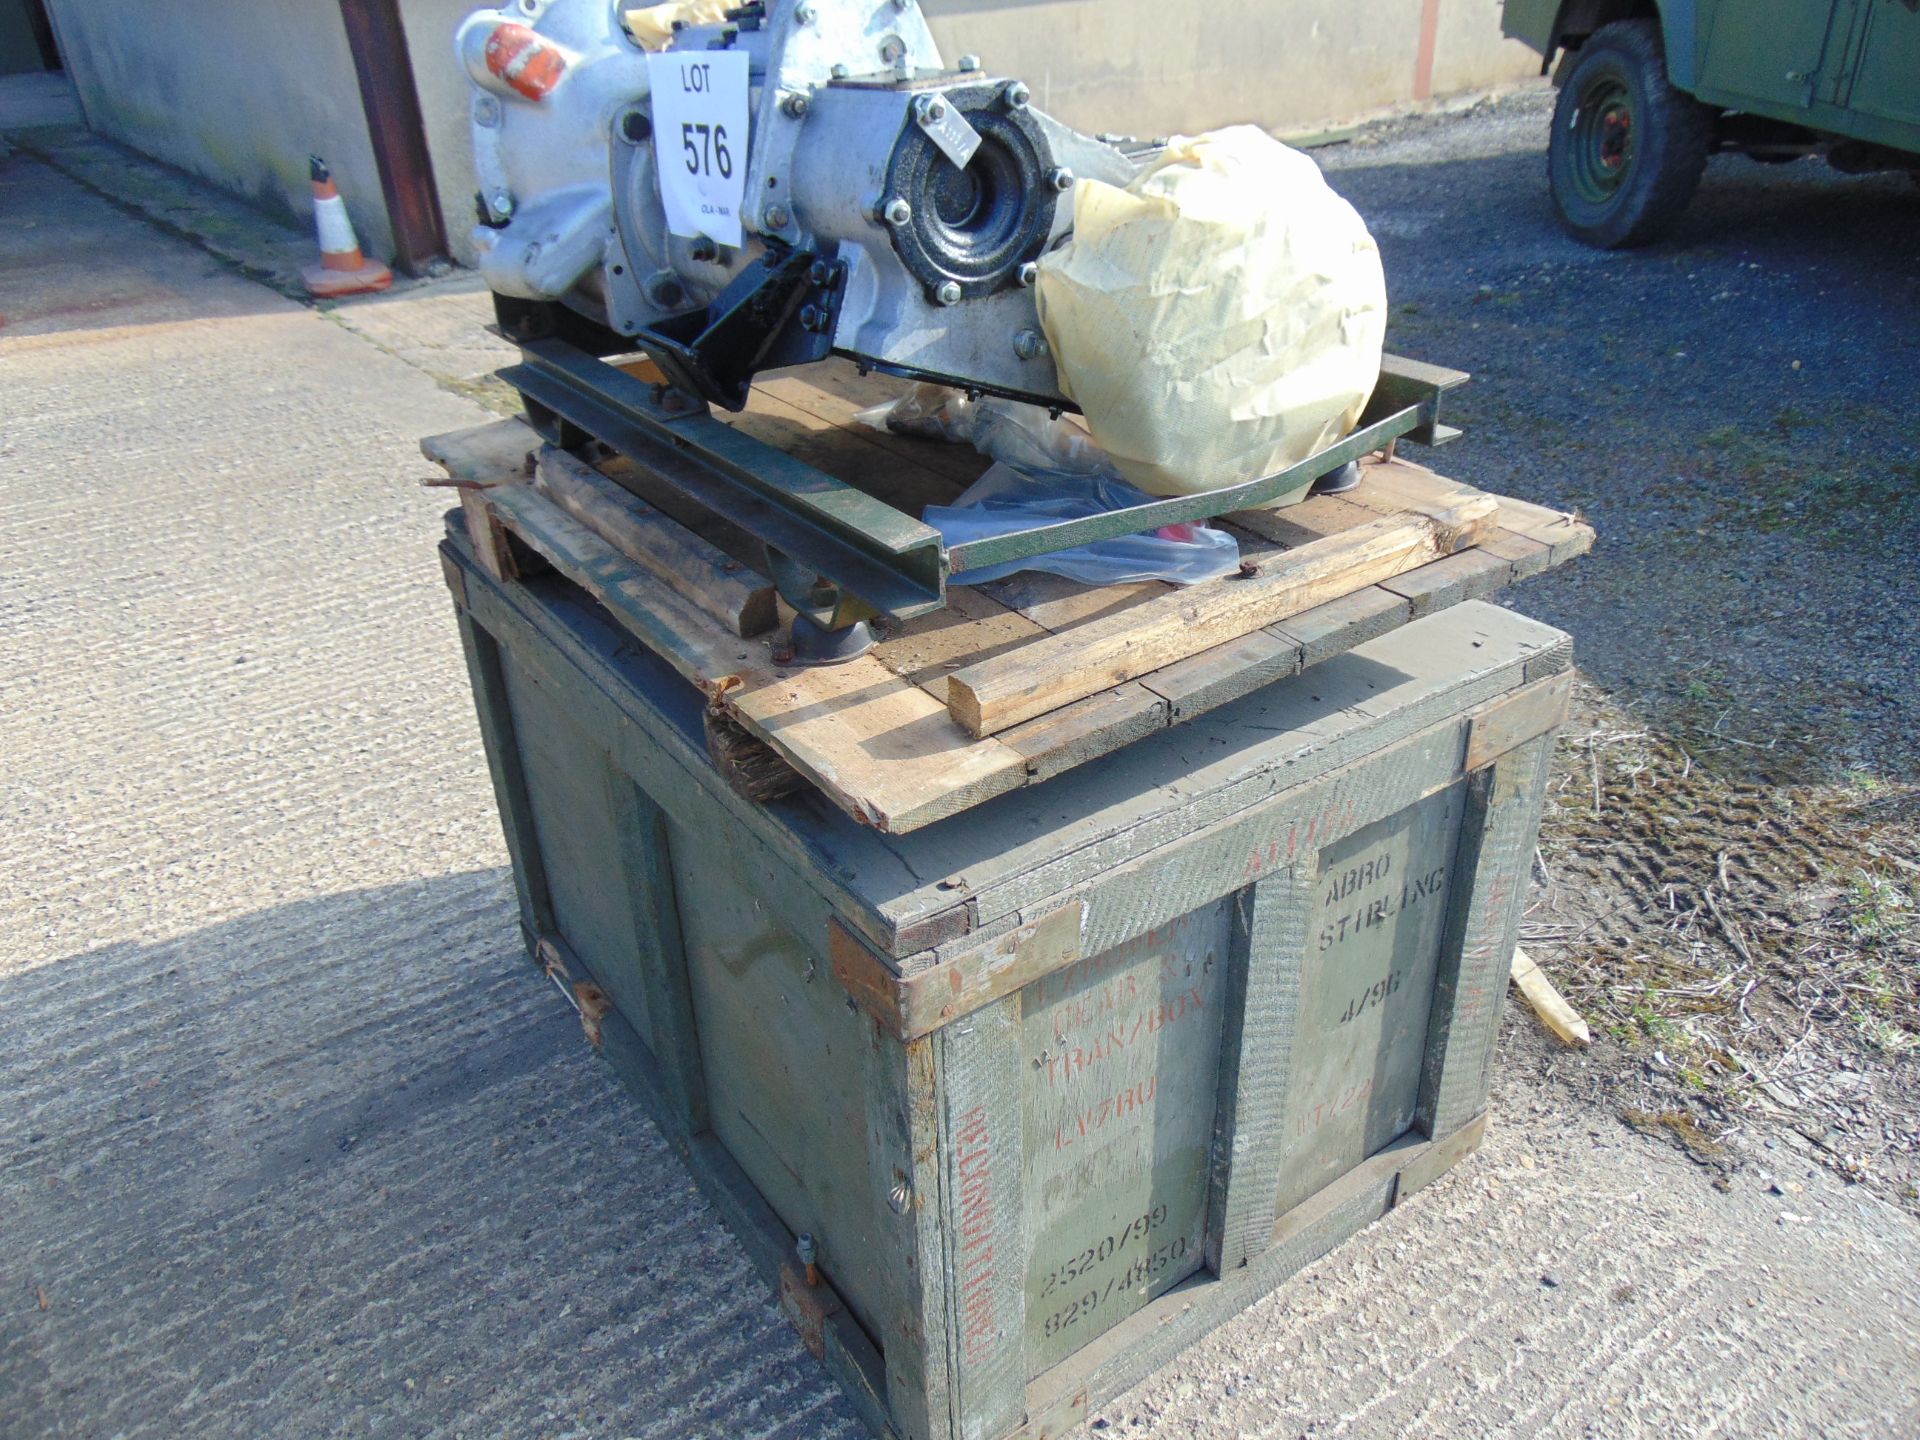 Army Recon Series Gearbox c/w Ancillaries as shown in Original Crate - Image 20 of 20